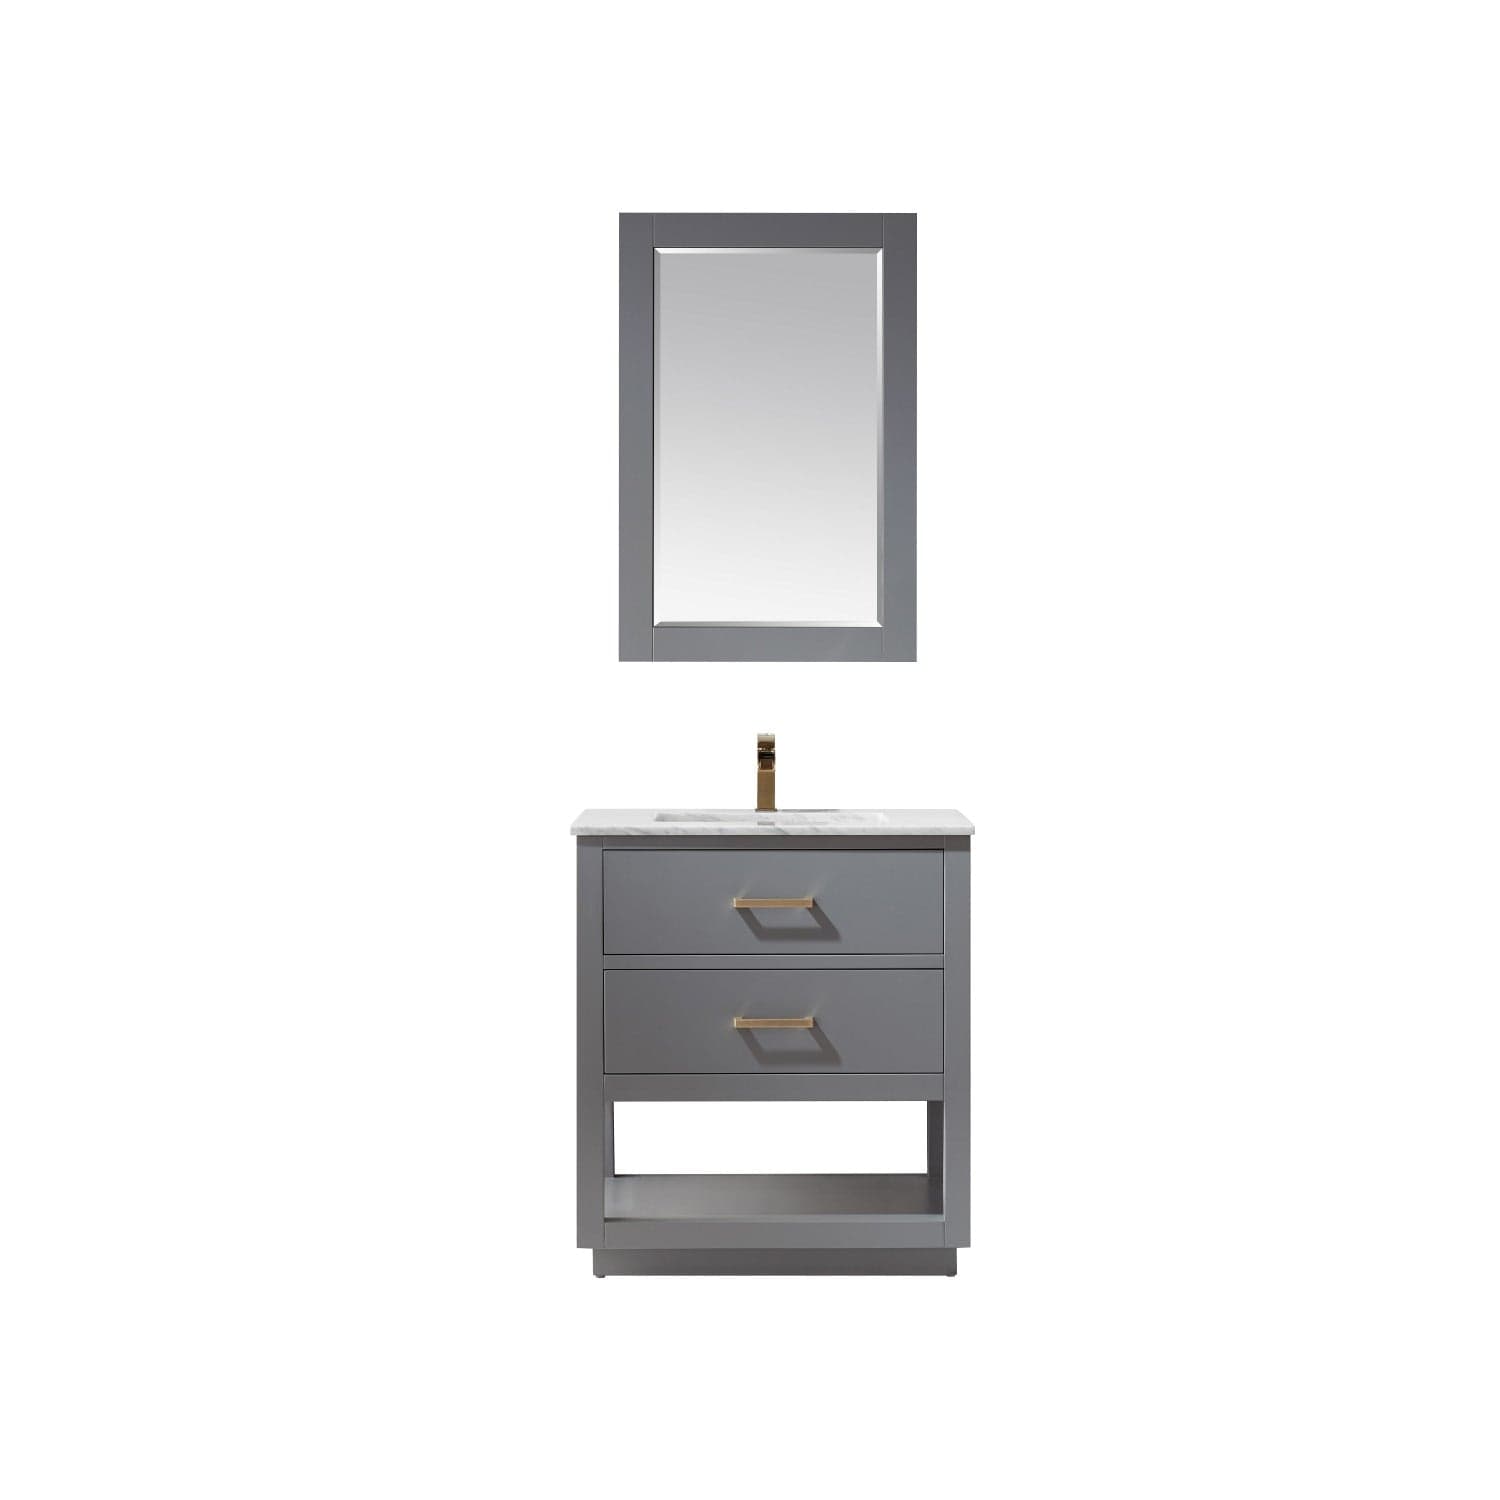 Altair Remi 30" Single Bathroom Vanity Set in Gray and Carrara White Marble Countertop with Mirror 532030-GR-CA - Molaix631112971331Vanity532030-GR-CA